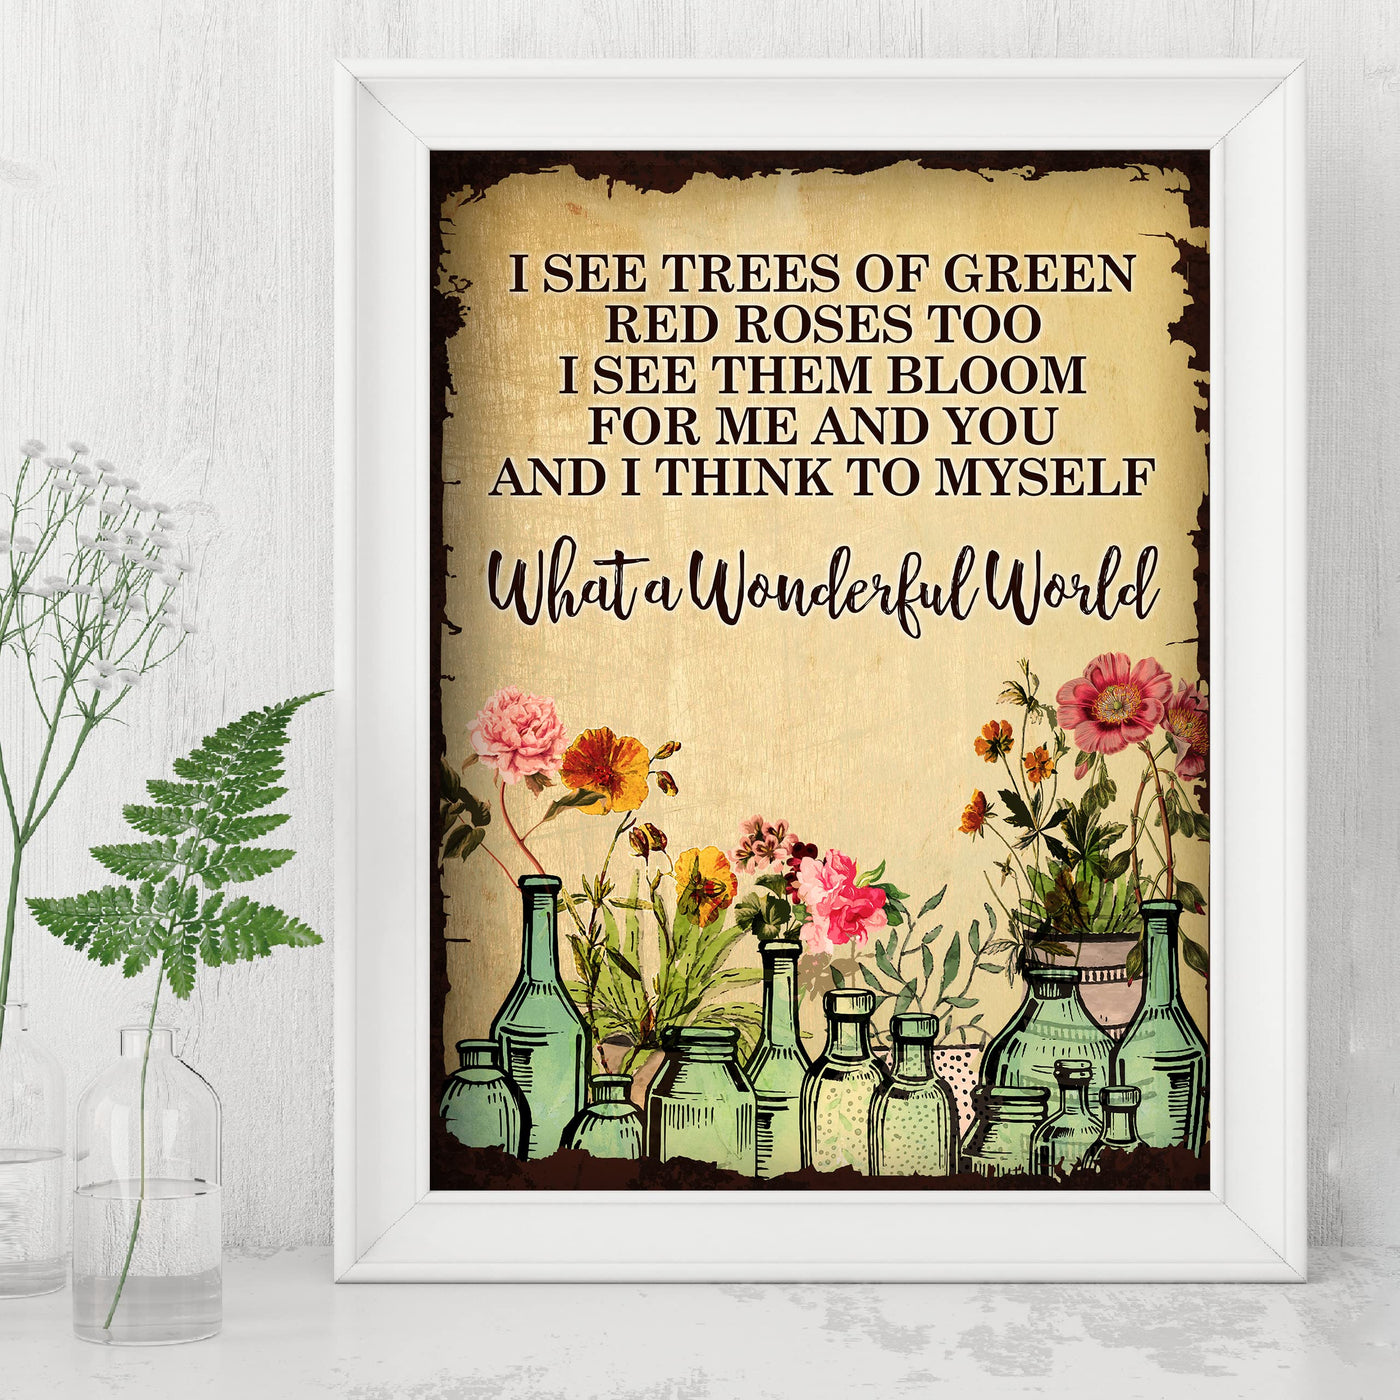 What A Wonderful World Song Lyric Wall Art -8 x 10" Floral Music Lyrics Print -Ready to Frame. Rustic Wood Design Decor for Home-Studio-Bar-Man Cave. Great Gift for Louie Armstrong & All Jazz Fans!